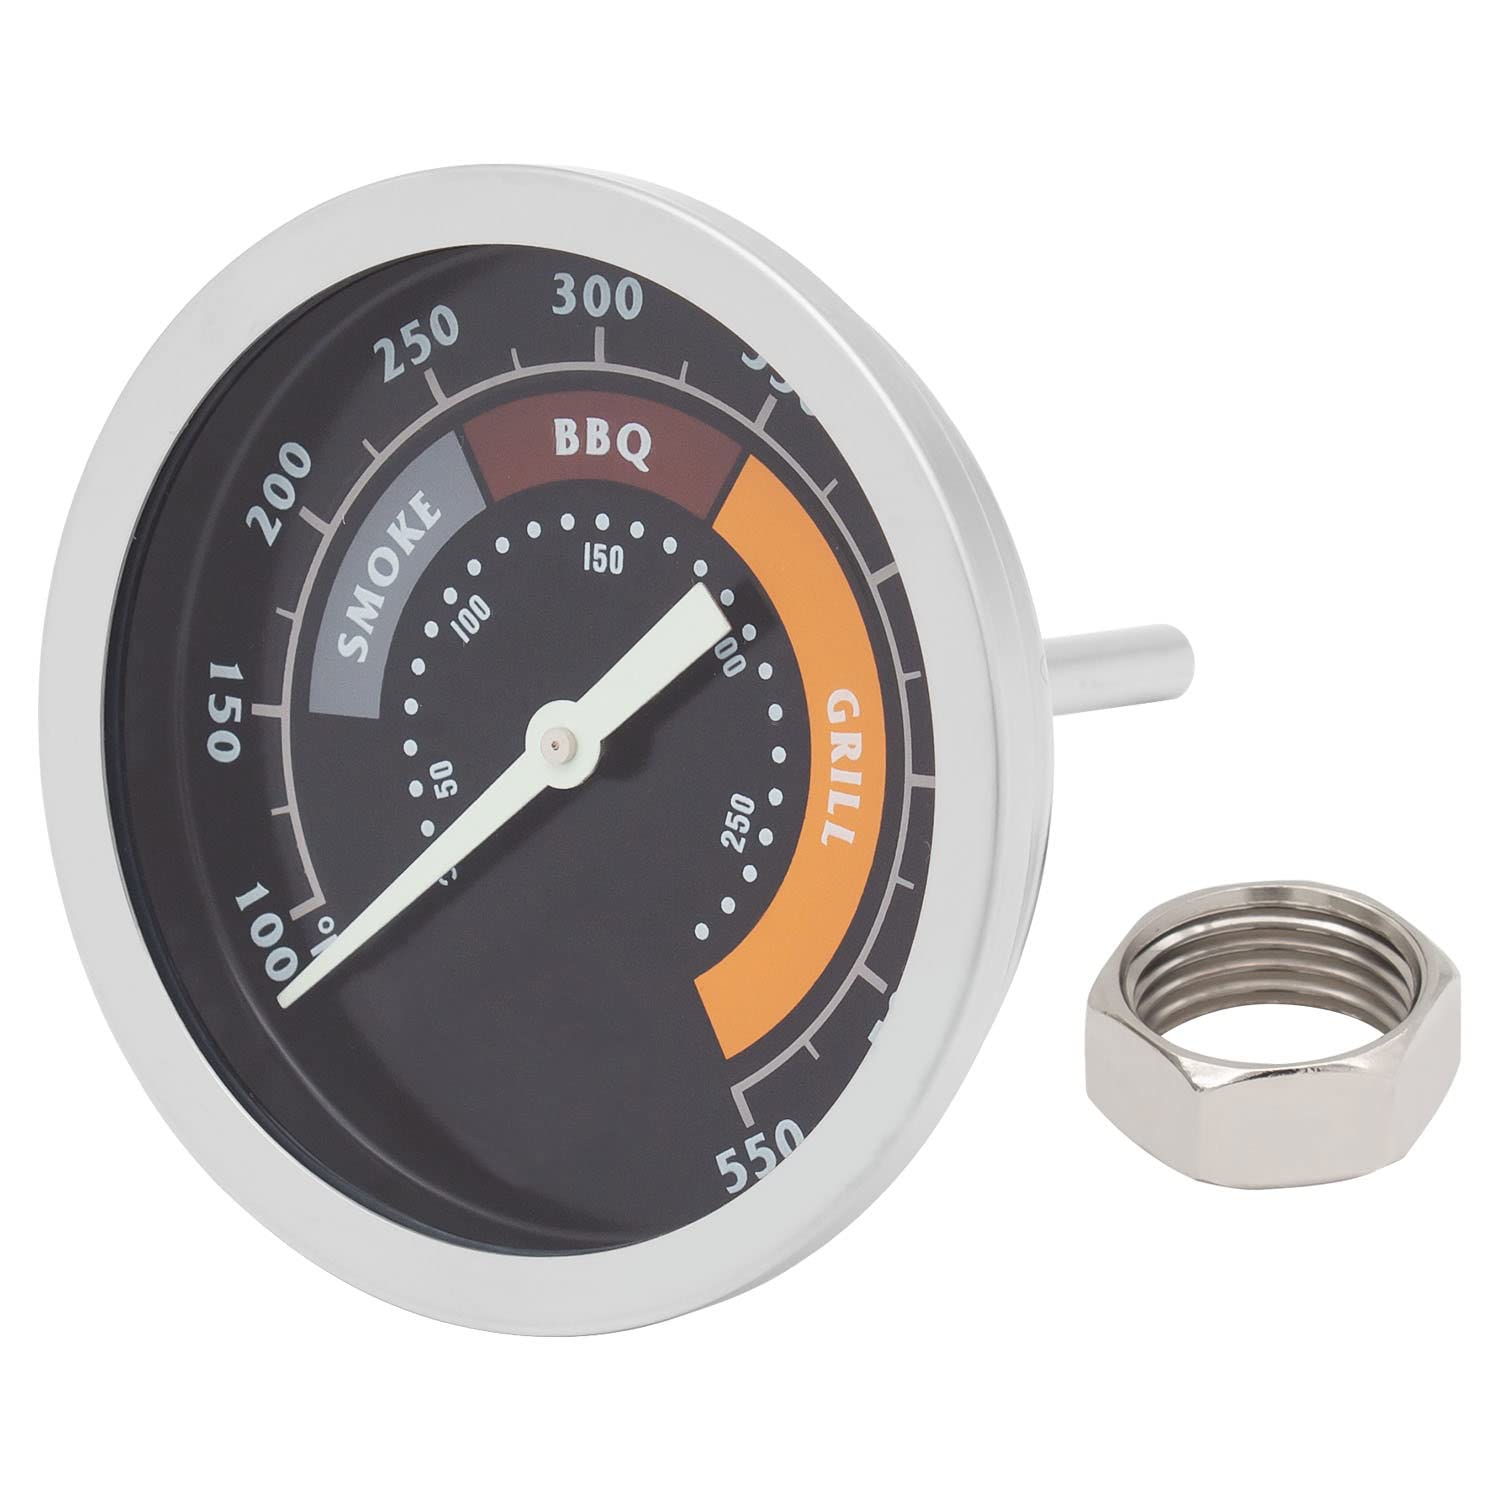 Grill Dome Temperature Gauge Thermometer for Oklahoma Joe's